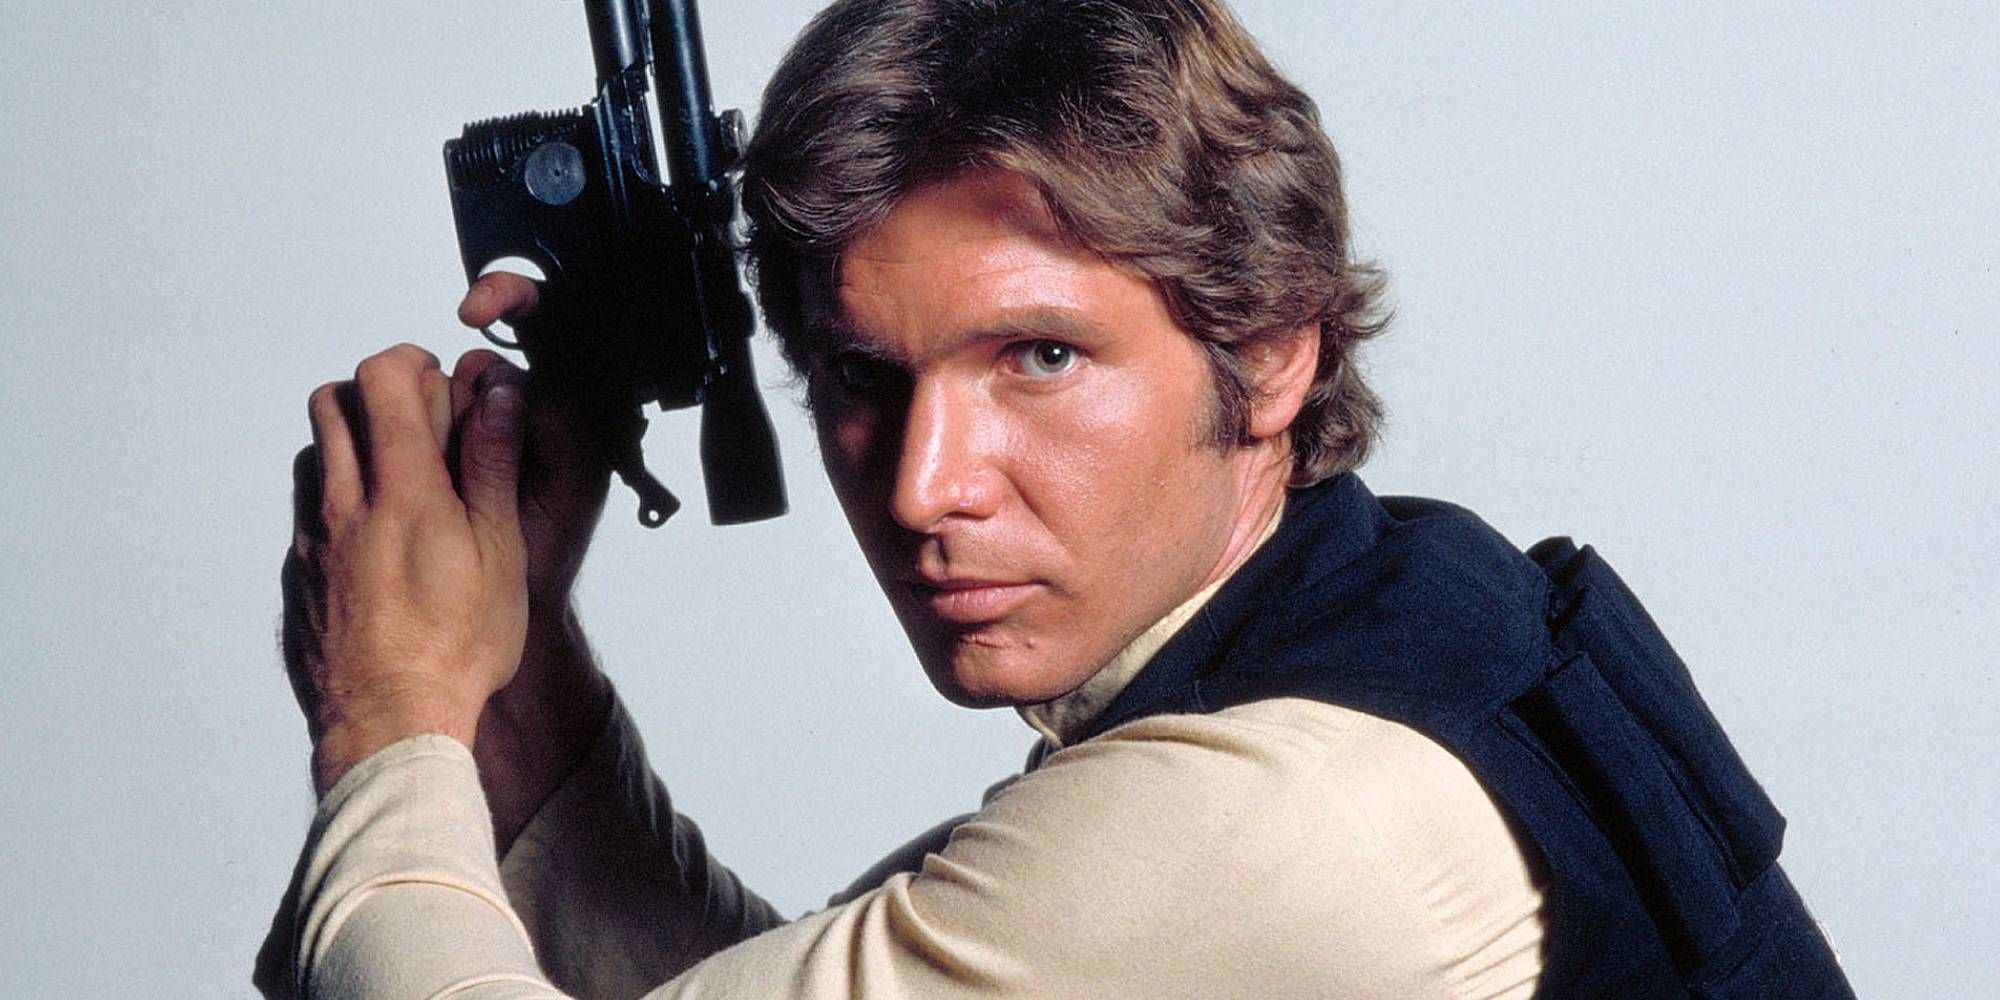 Han Solo poses with his trusty pistol